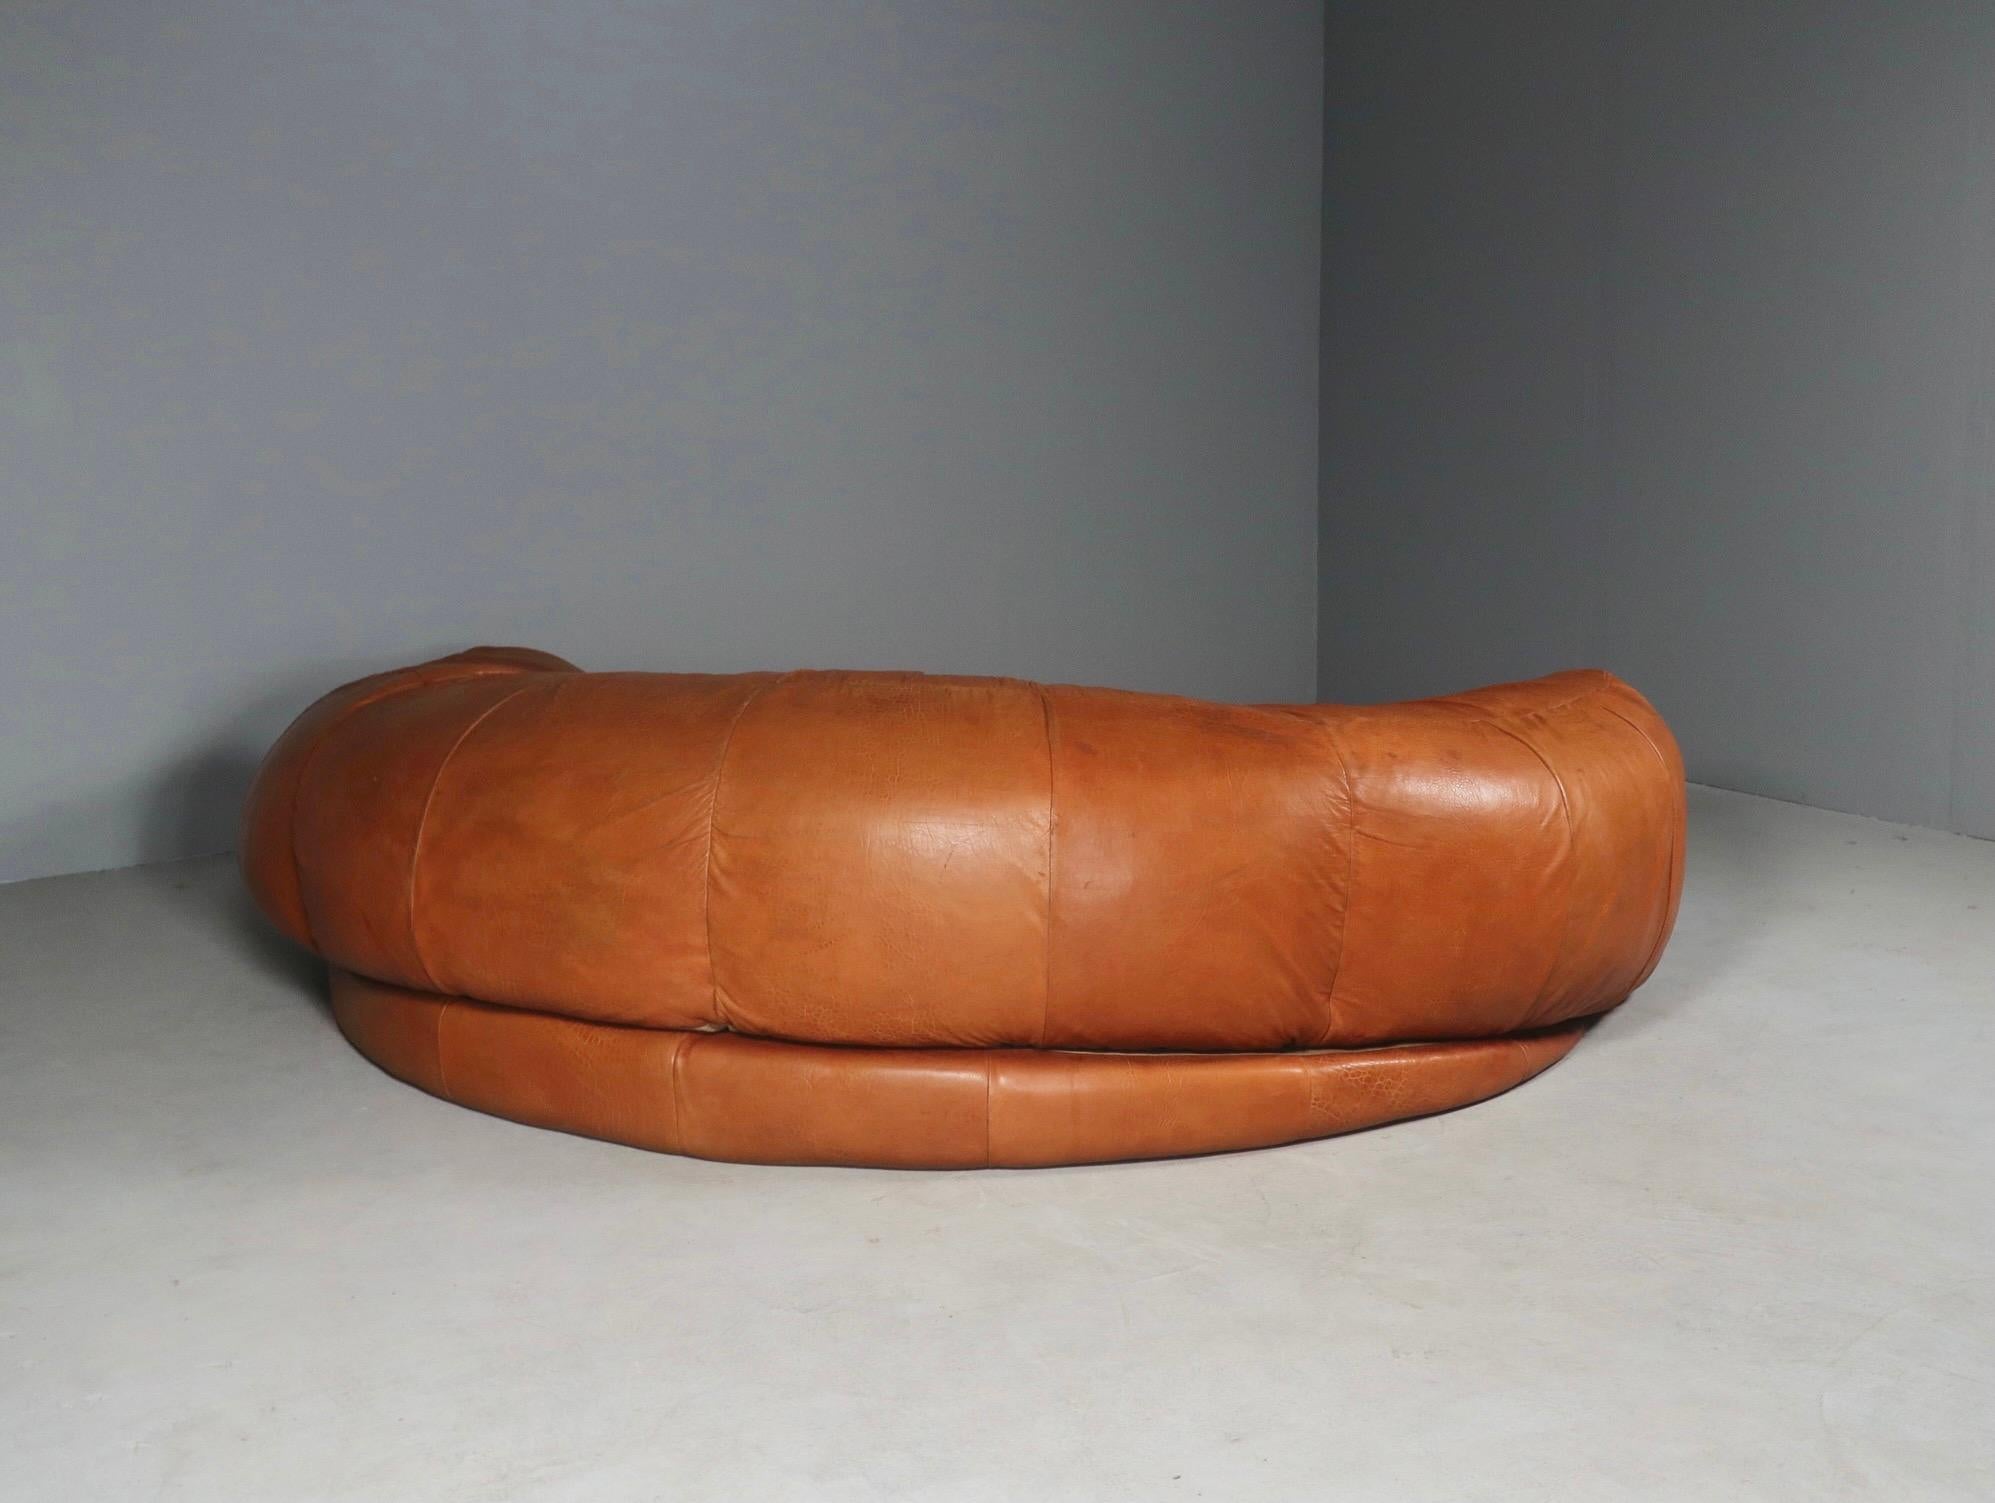 Stunning leather sofa by Raphael Raffel for Honore, Paris. Made to order back in the 1970s and seldom available for purchase. Saddle leather sofa in the shape of a giant croissant. Good vintage condition and gorgeous coloring.